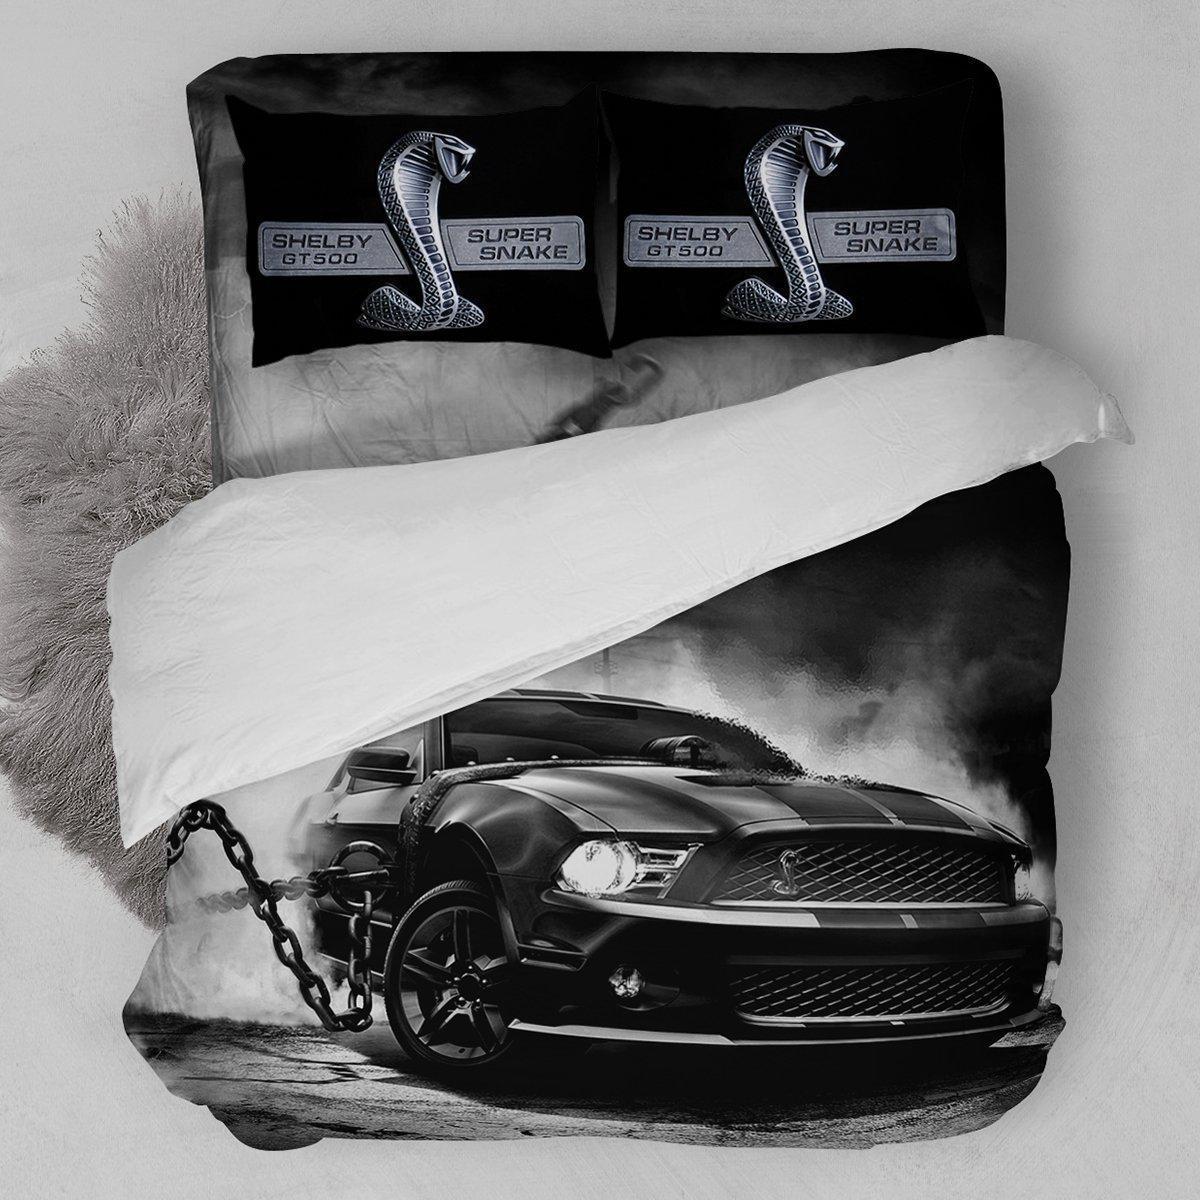 Ford Mustang Shelby Cobra Bedding Set